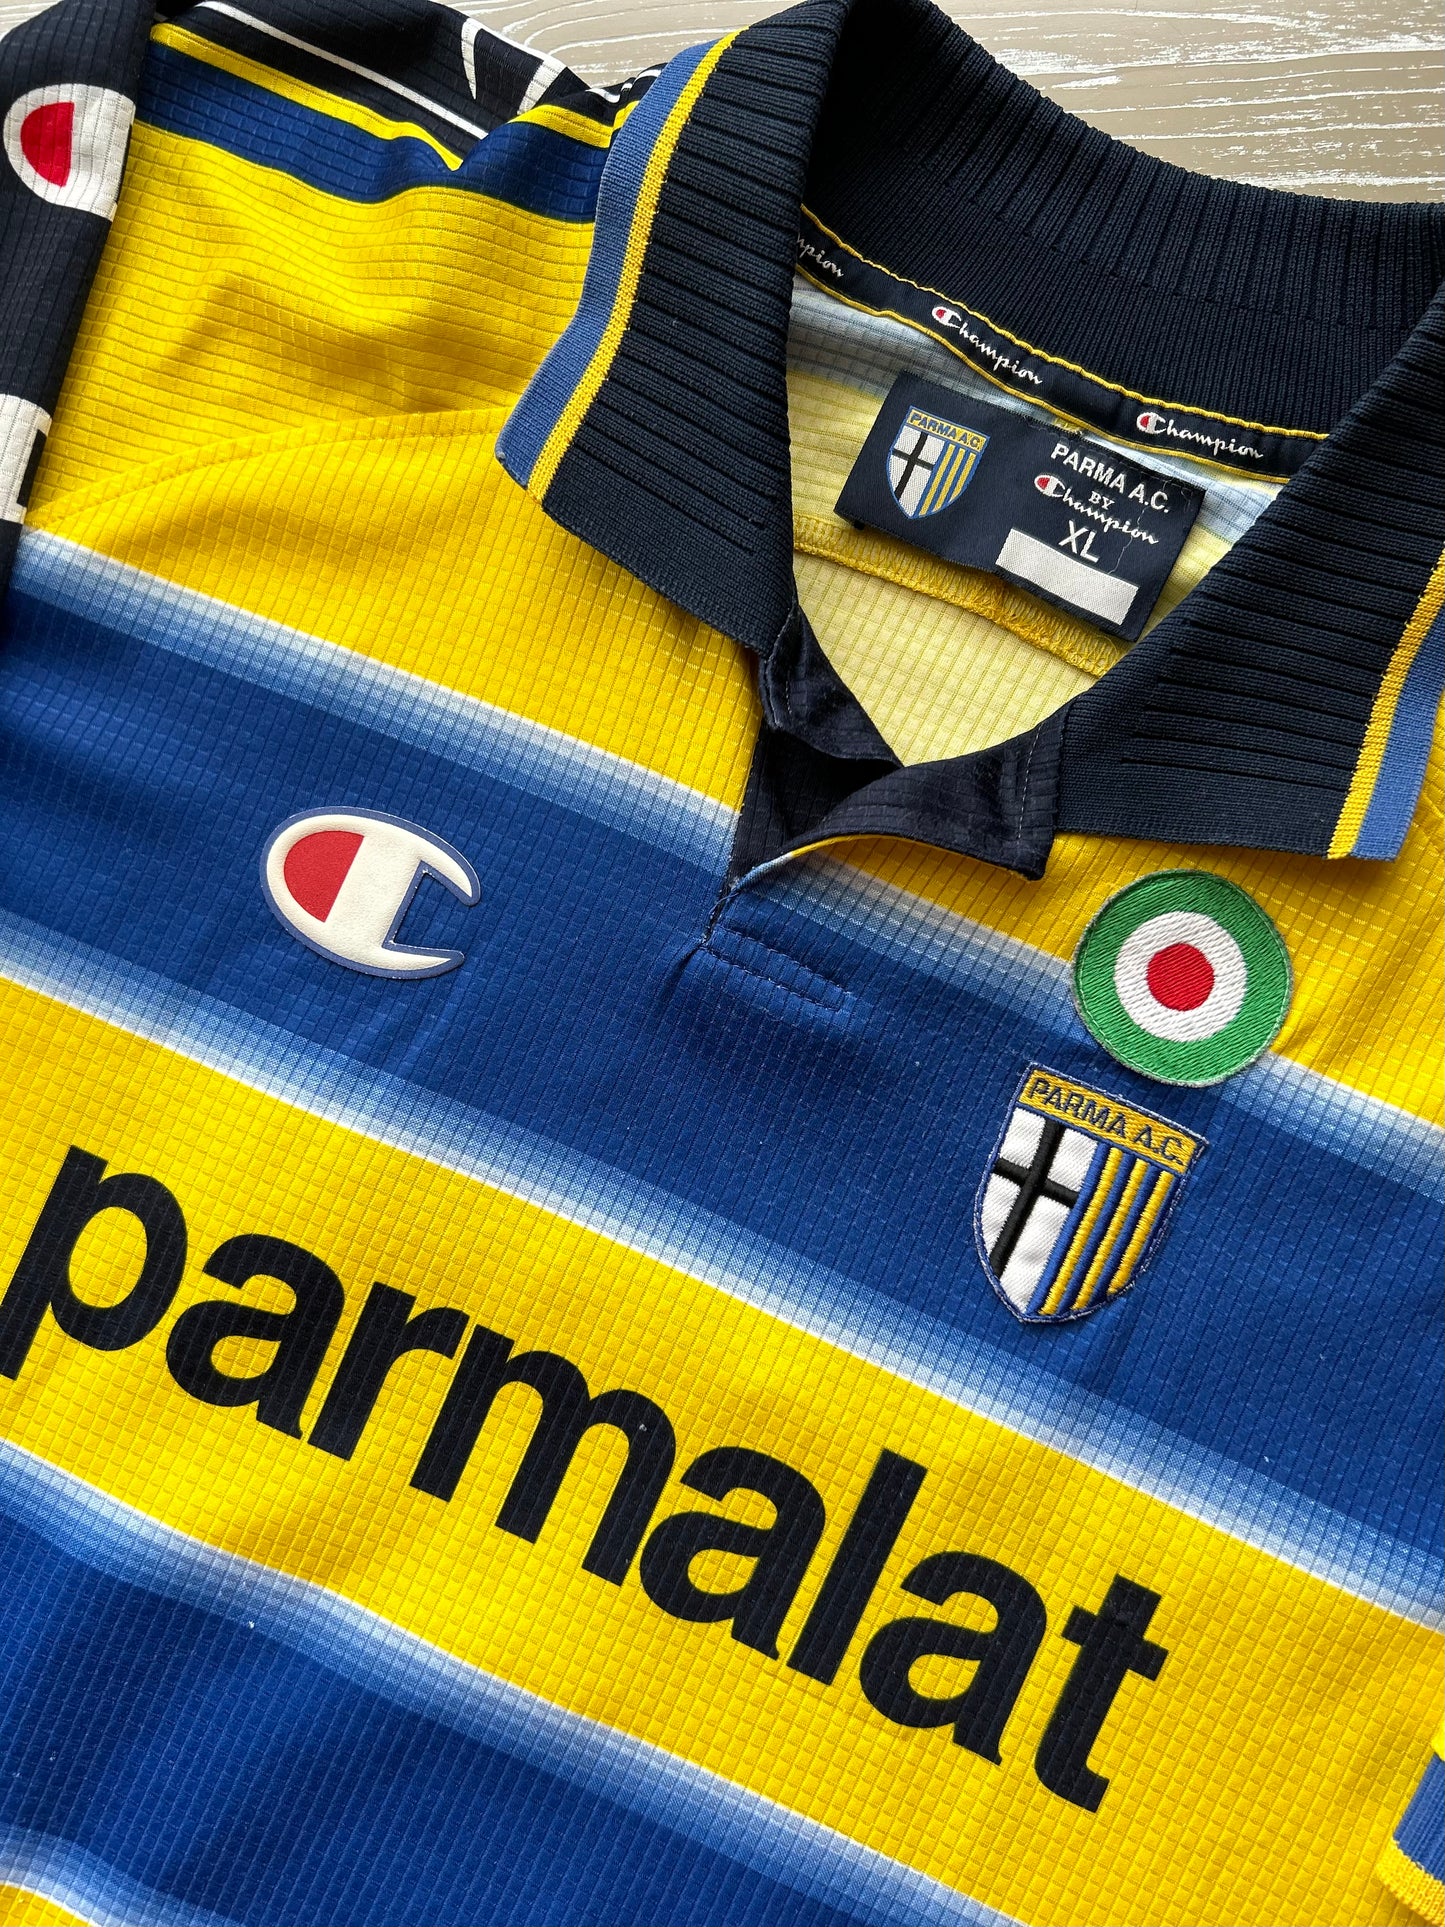 1999/00 Parma AC #32 Home Jersey